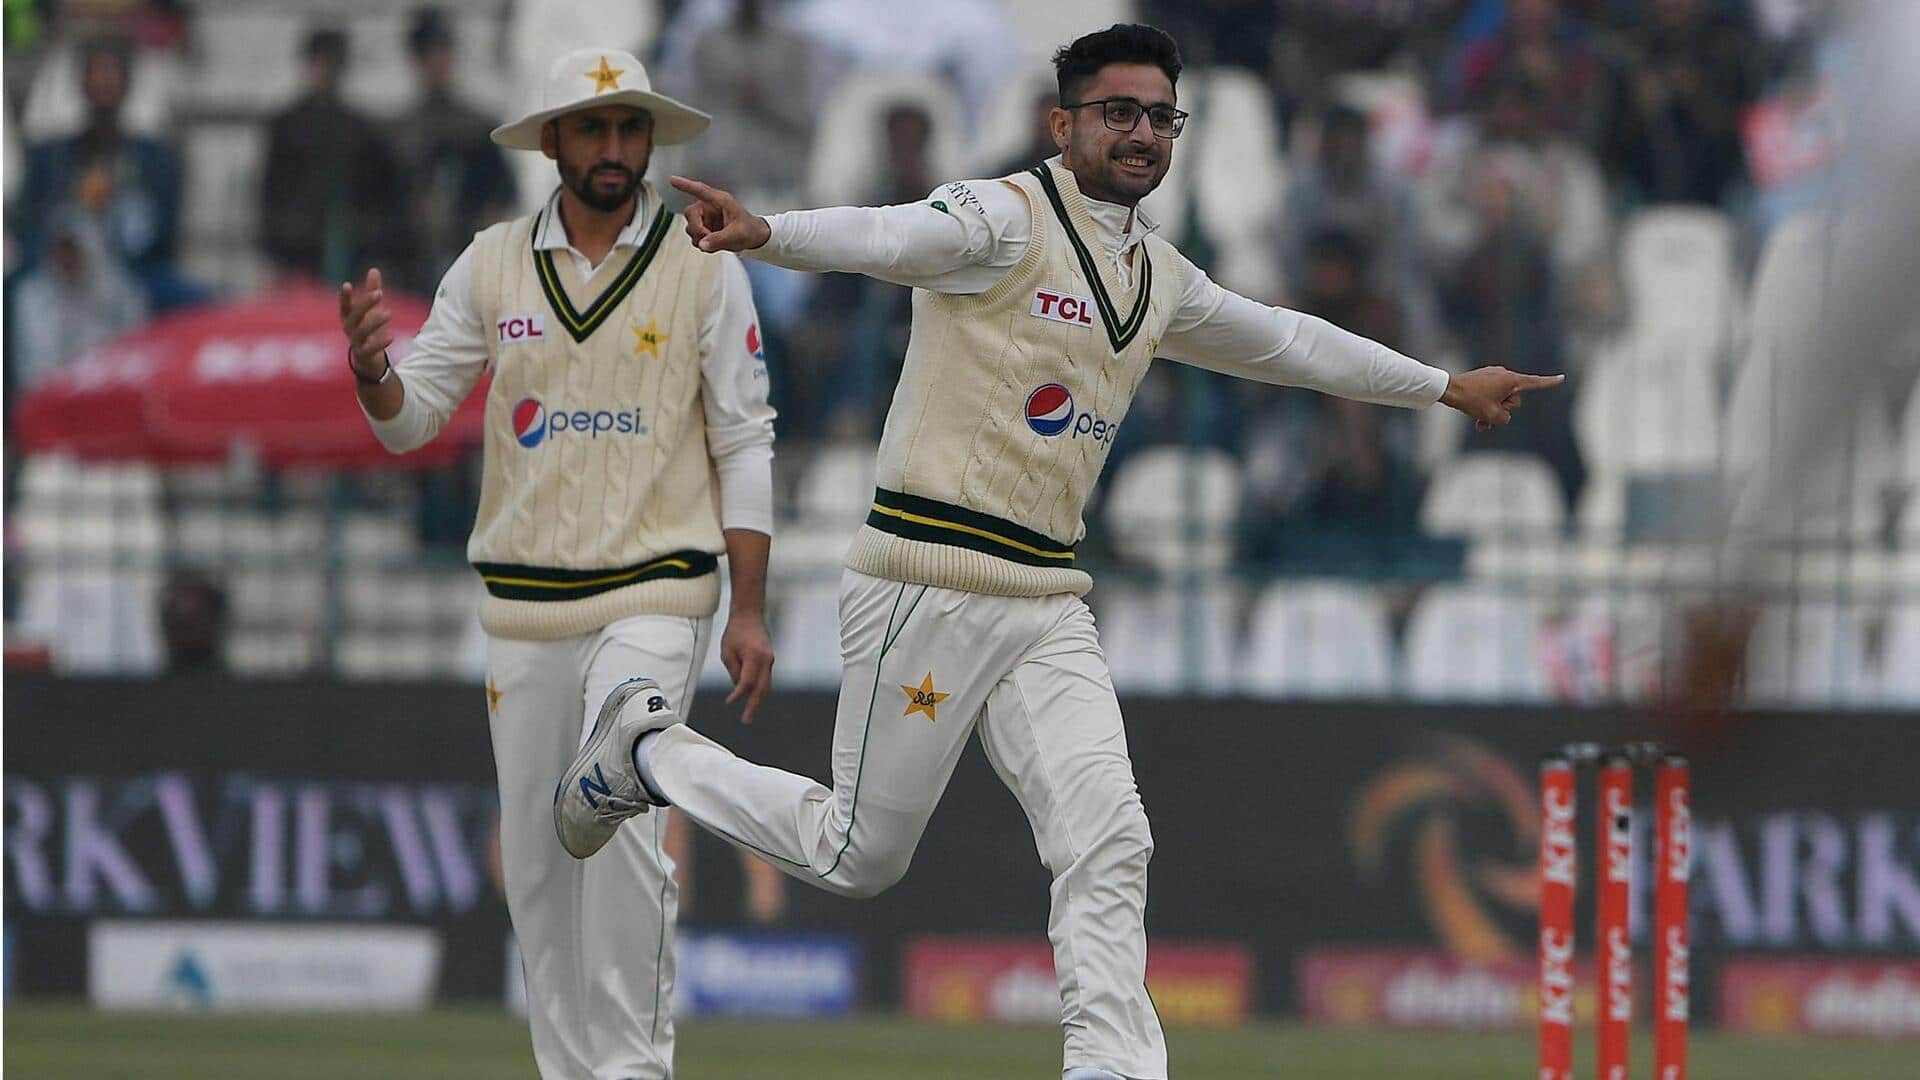 PCB may take action against spinner Abrar Ahmed: Here's why